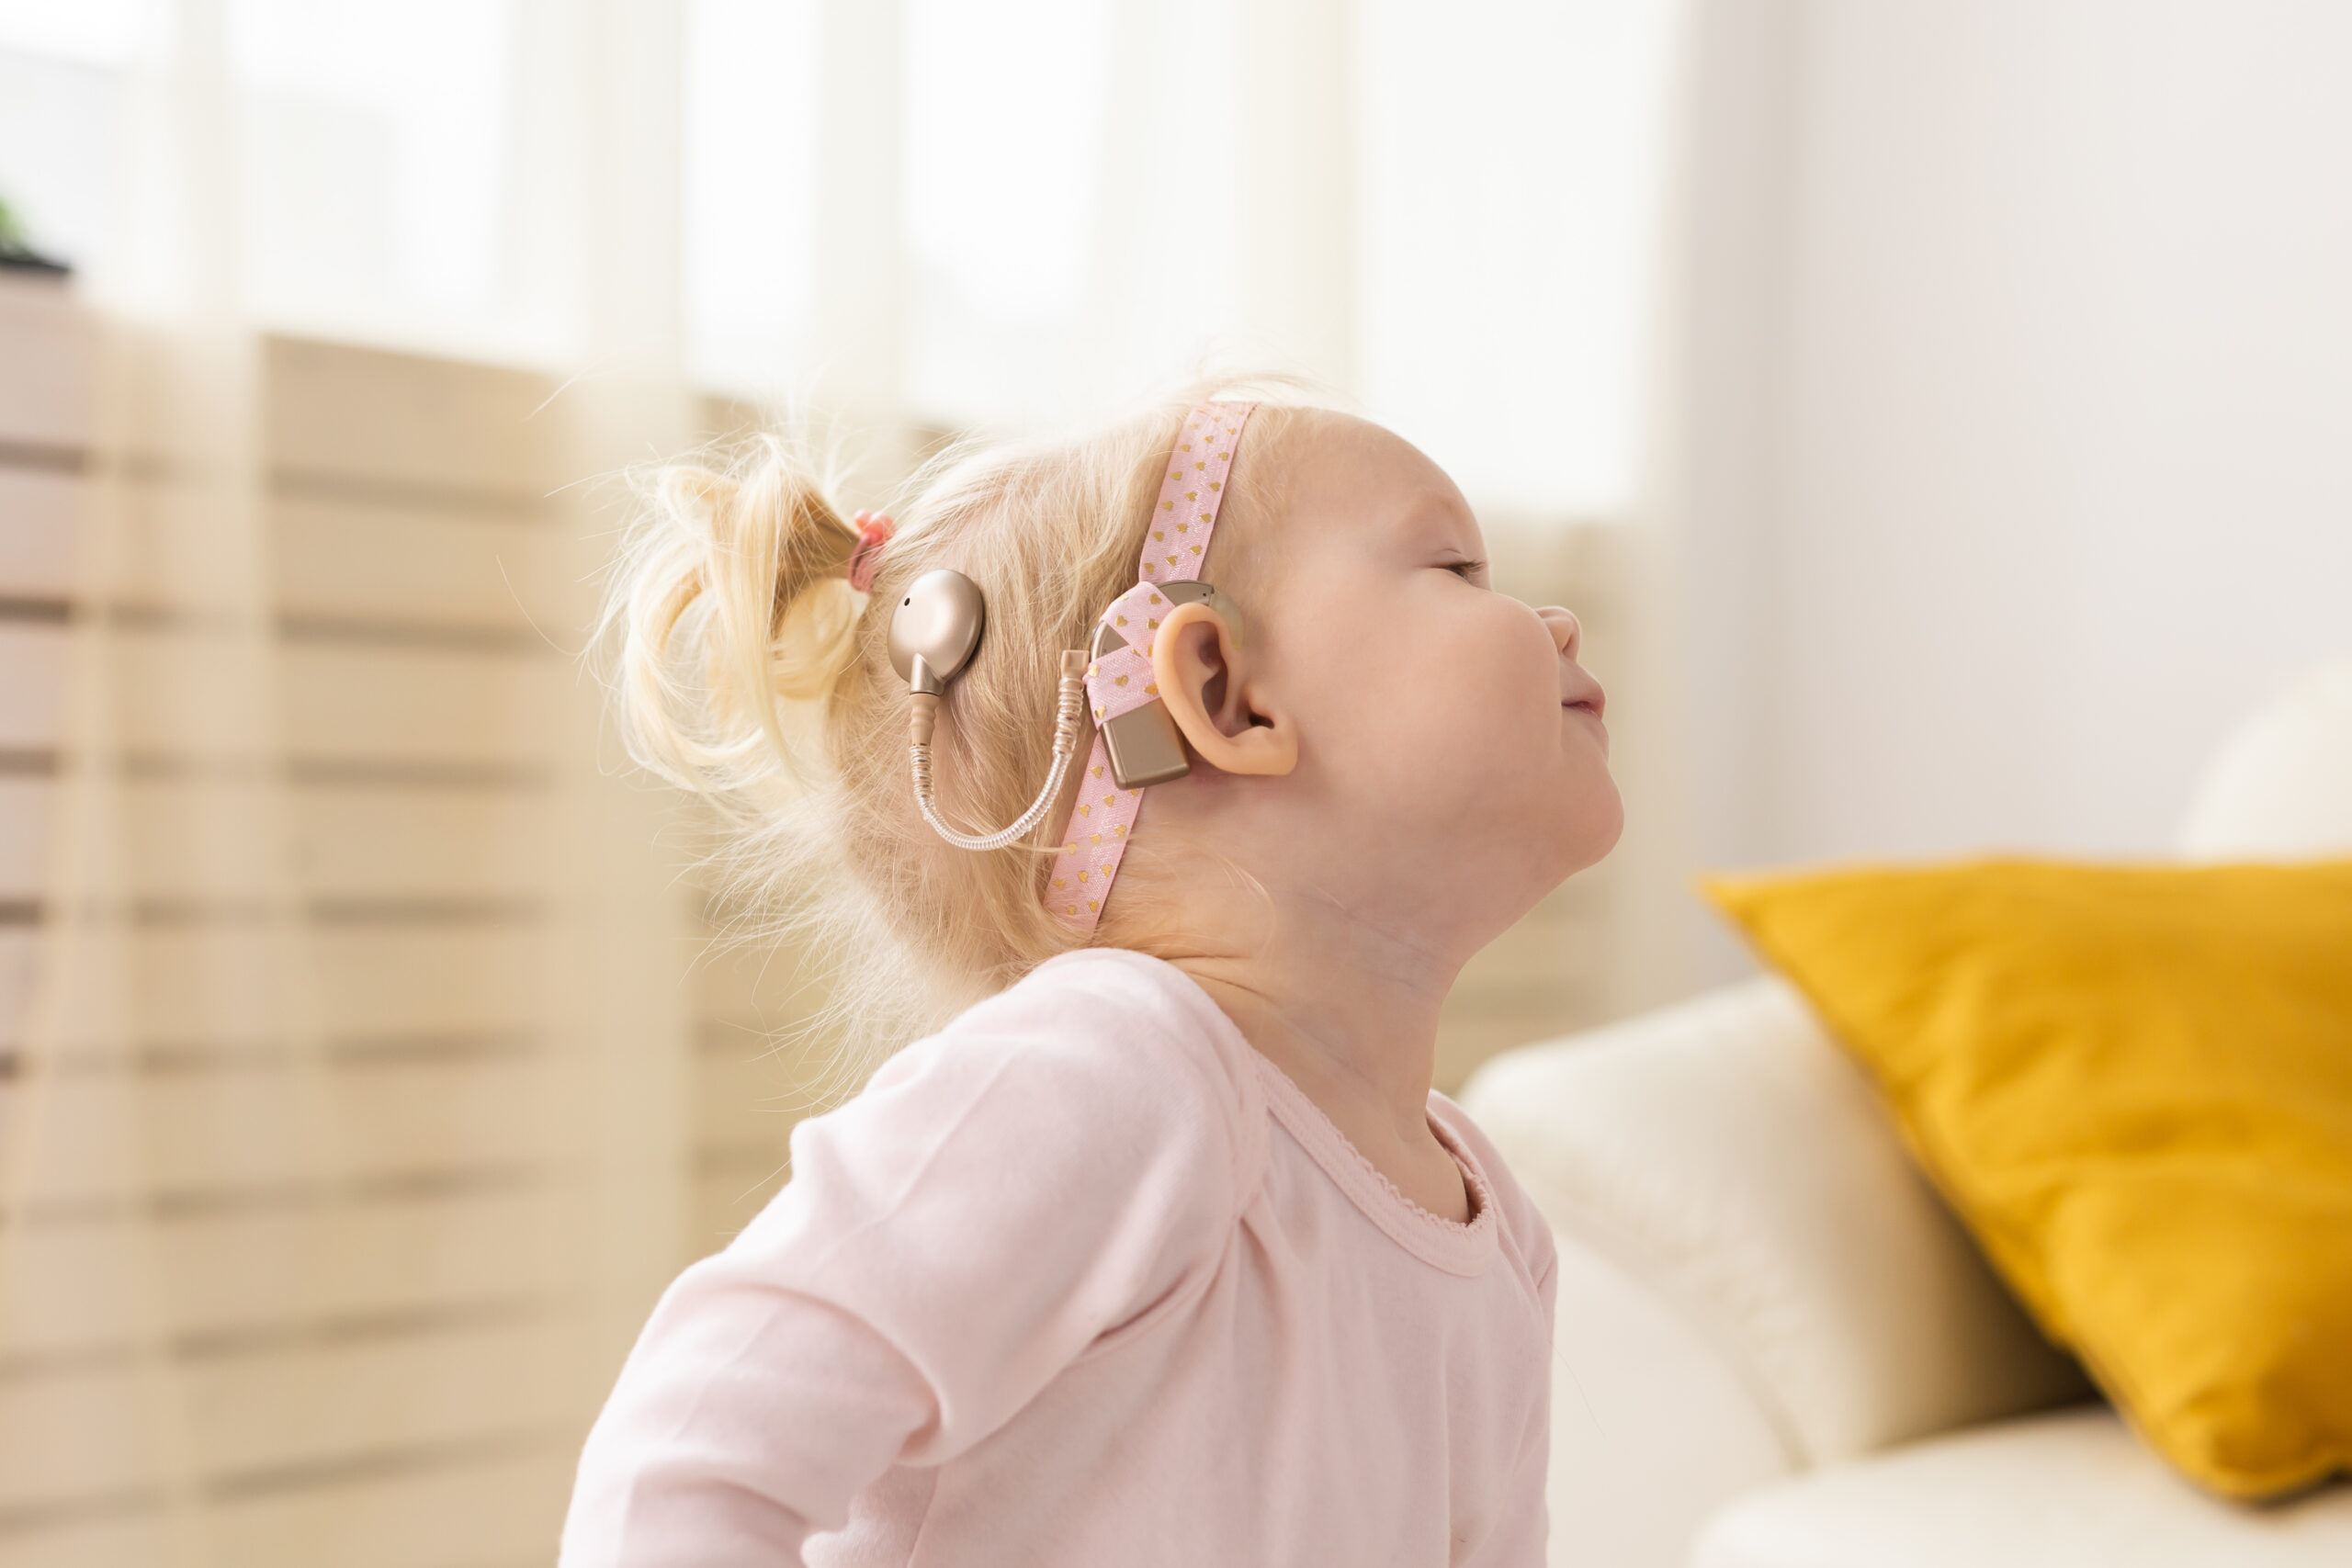 baby-with-cochlear-implants-having-fun-at-home-de-2022-03-16-07-36-21-utc-scaled.jpg